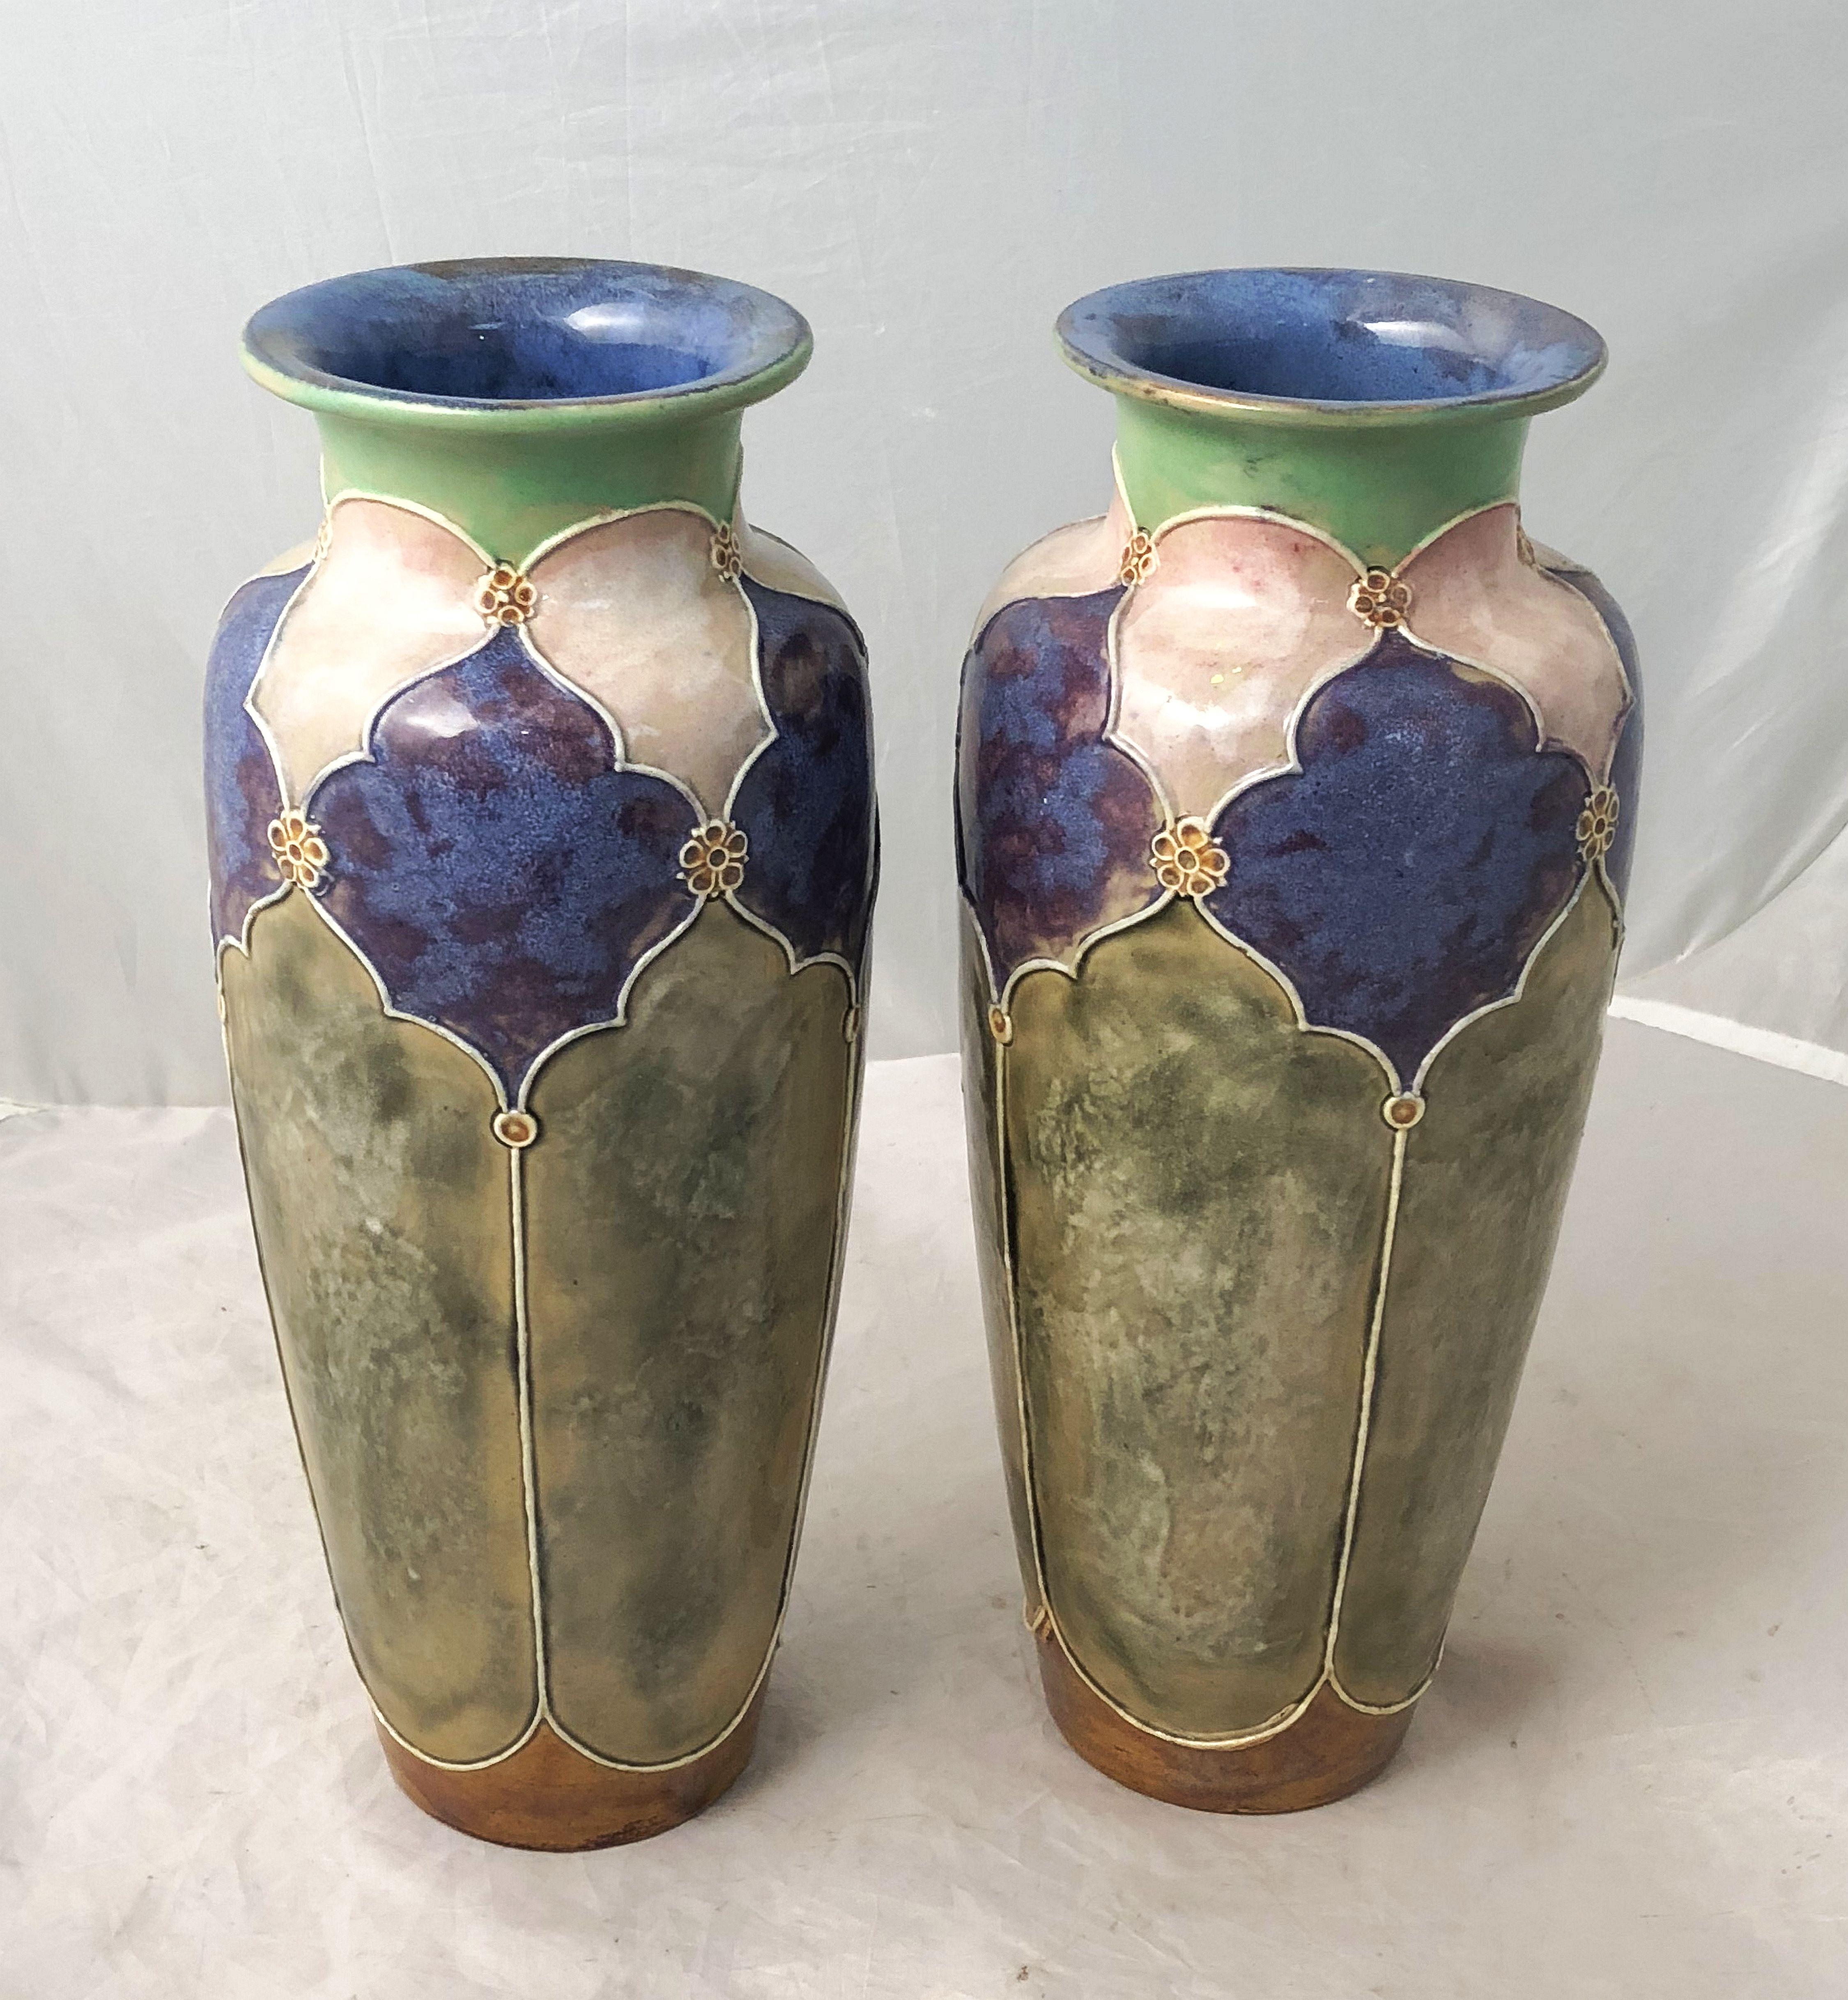 Glazed Arts and Crafts Period Vases by Royal Doulton 'Priced as a Pair'